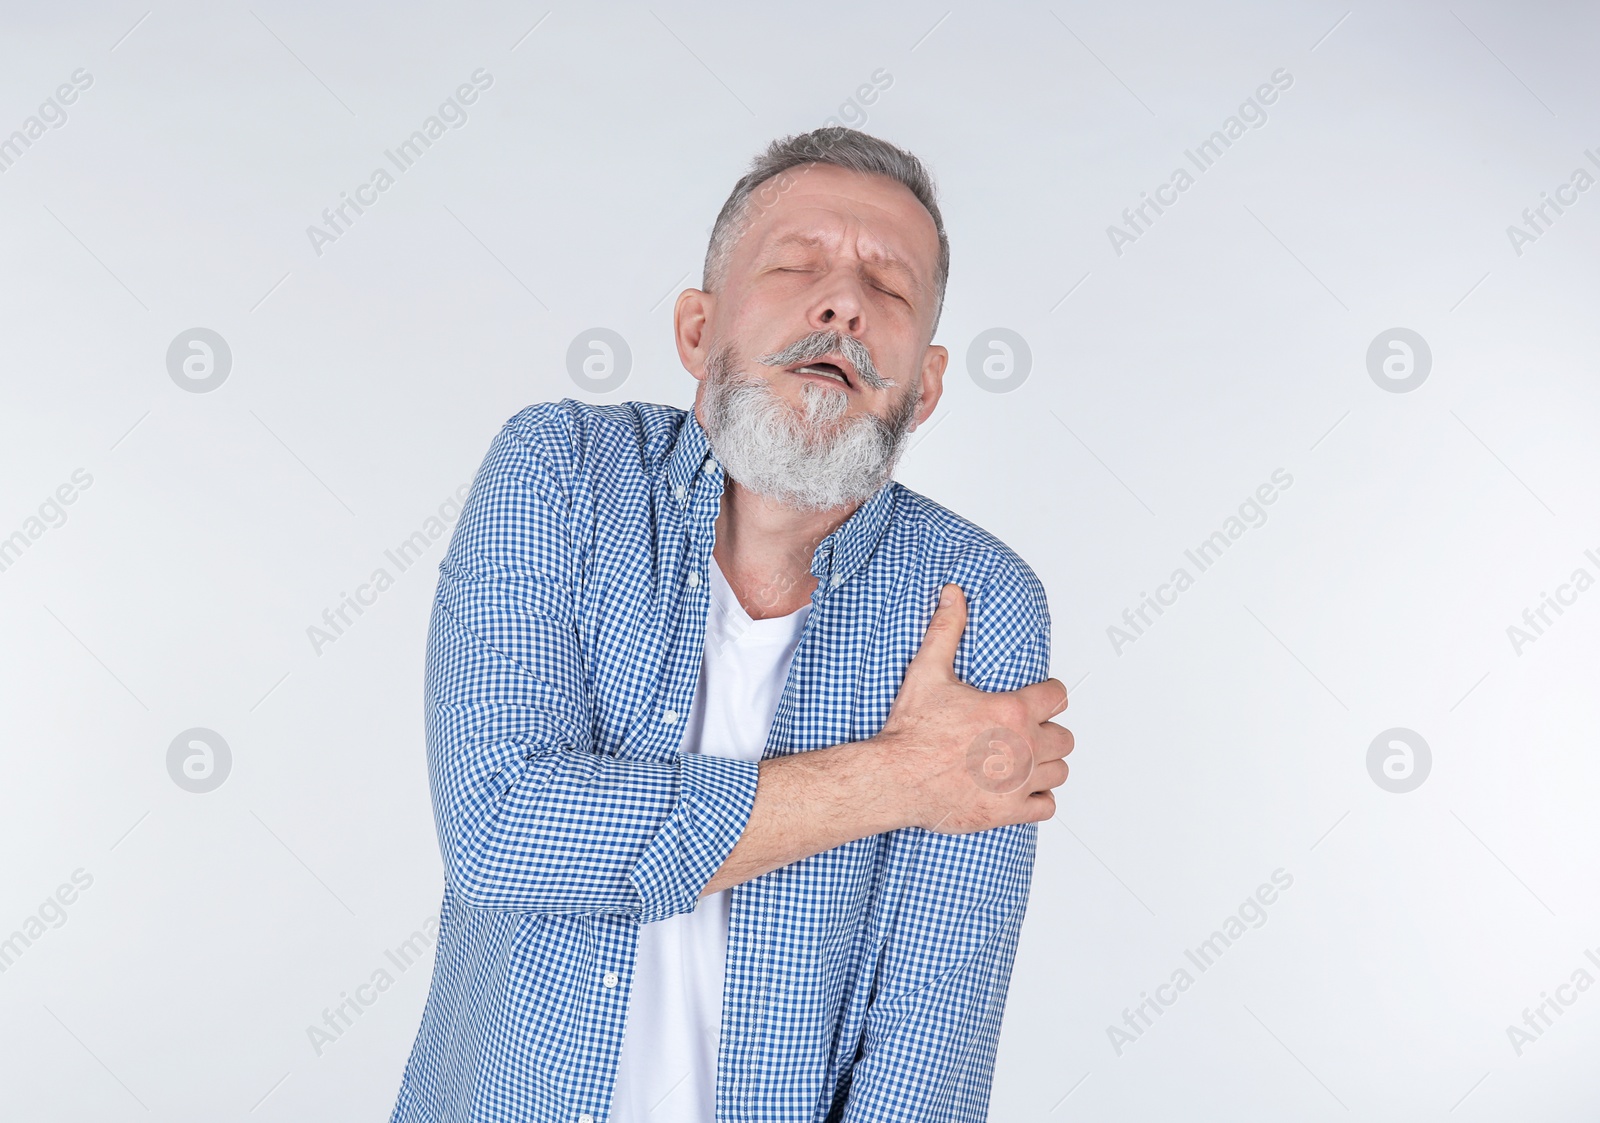 Photo of Man suffering from arm pain on light background